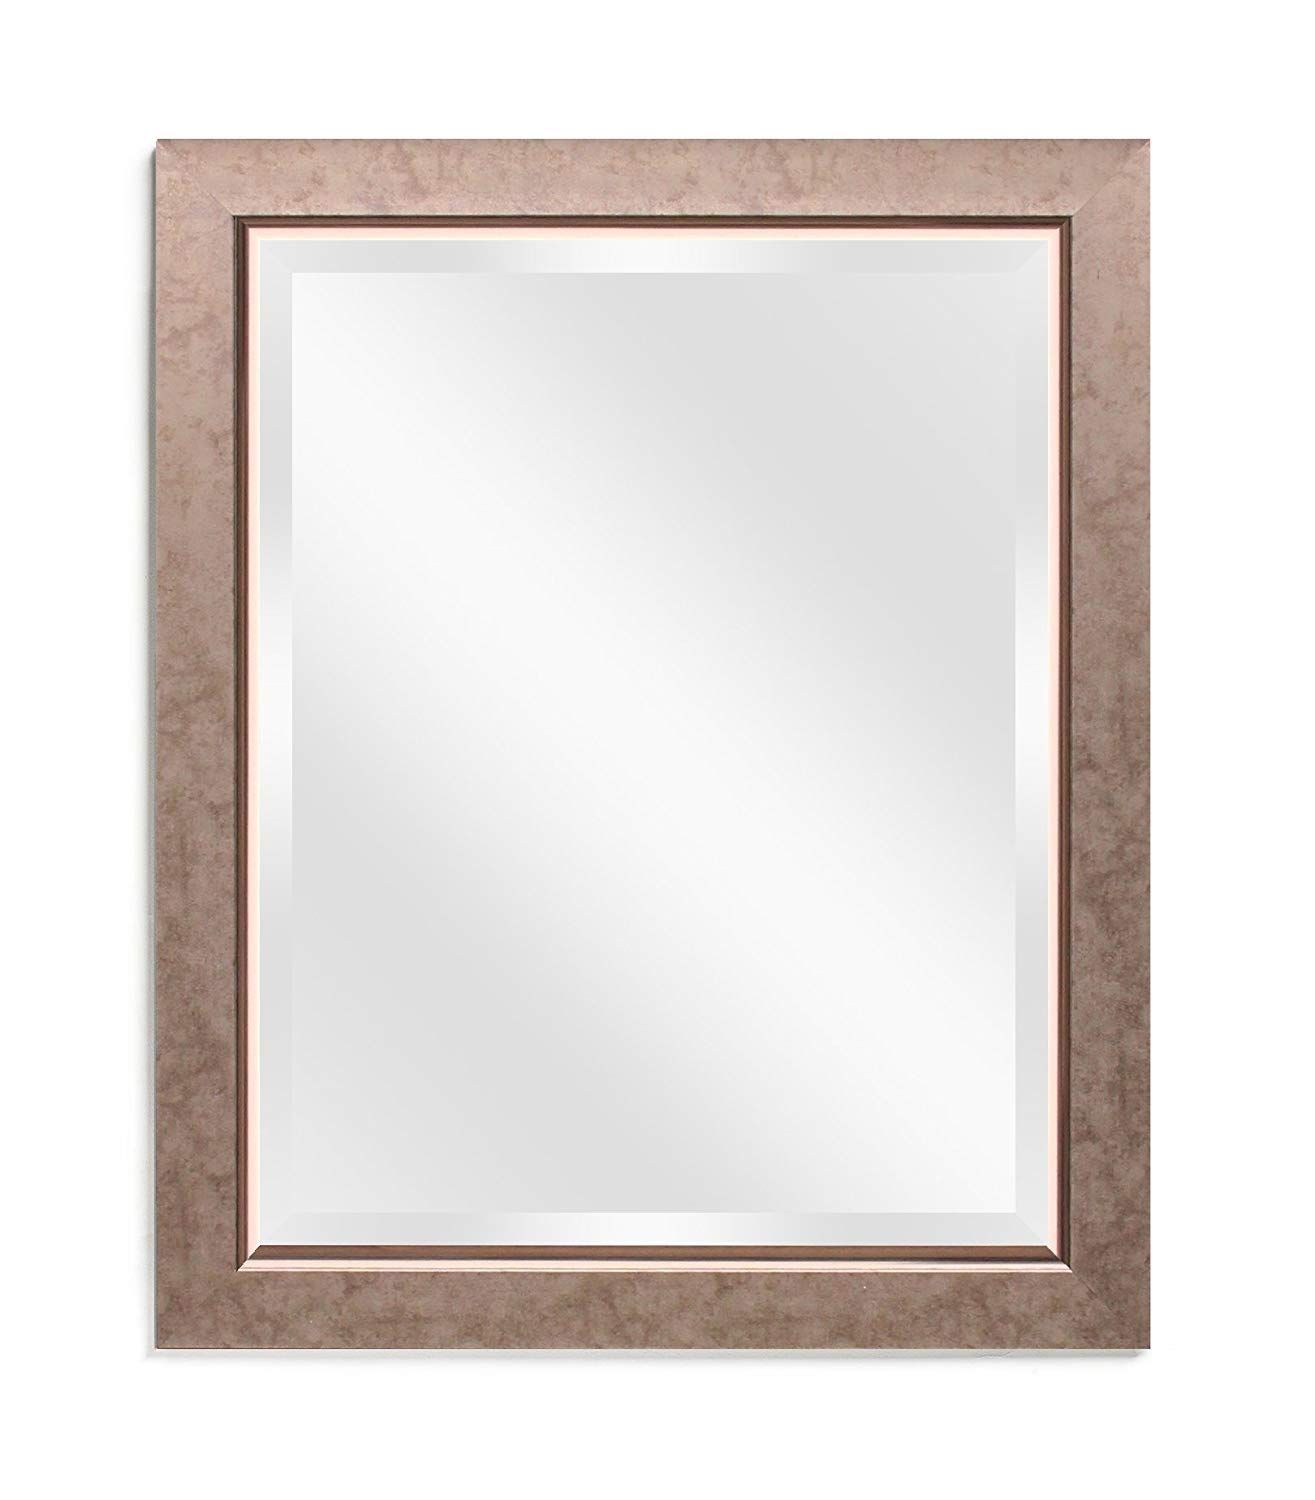 Amazon: Wall Beveled Mirror Framed – Bedroom Or Bathroom Throughout Hogge Modern Brushed Nickel Large Frame Wall Mirrors (View 14 of 15)